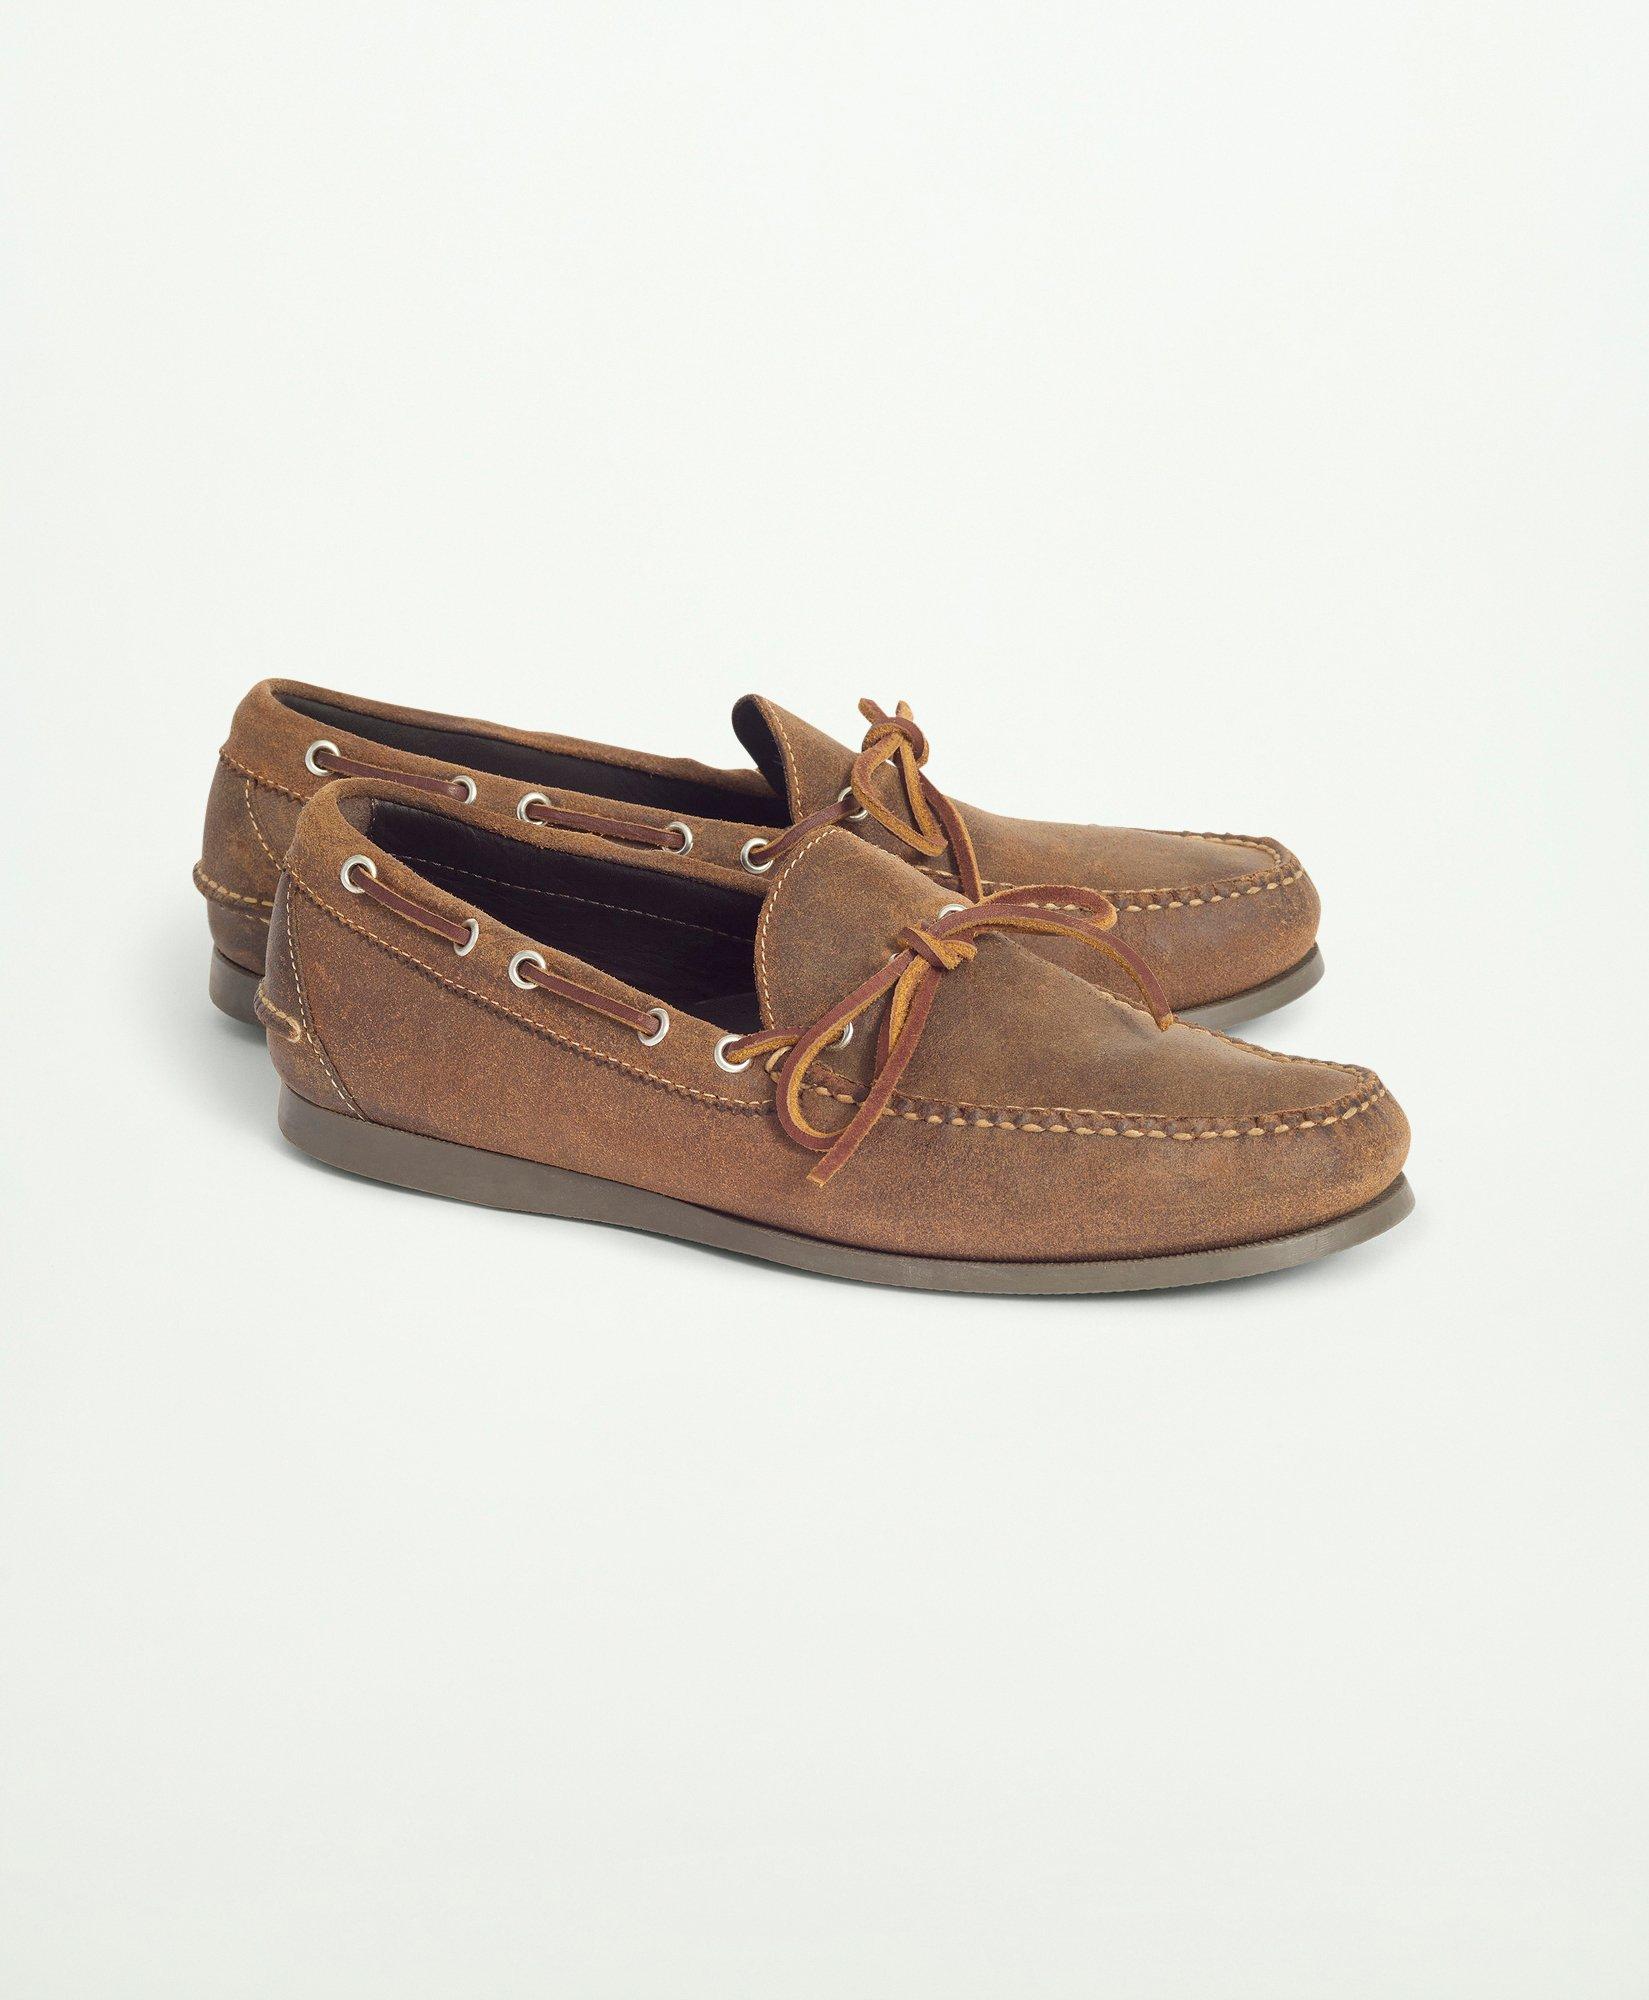 Brooks Brothers Sconset Camp Moc In Leather Shoes | Dark Brown | Size 12 D